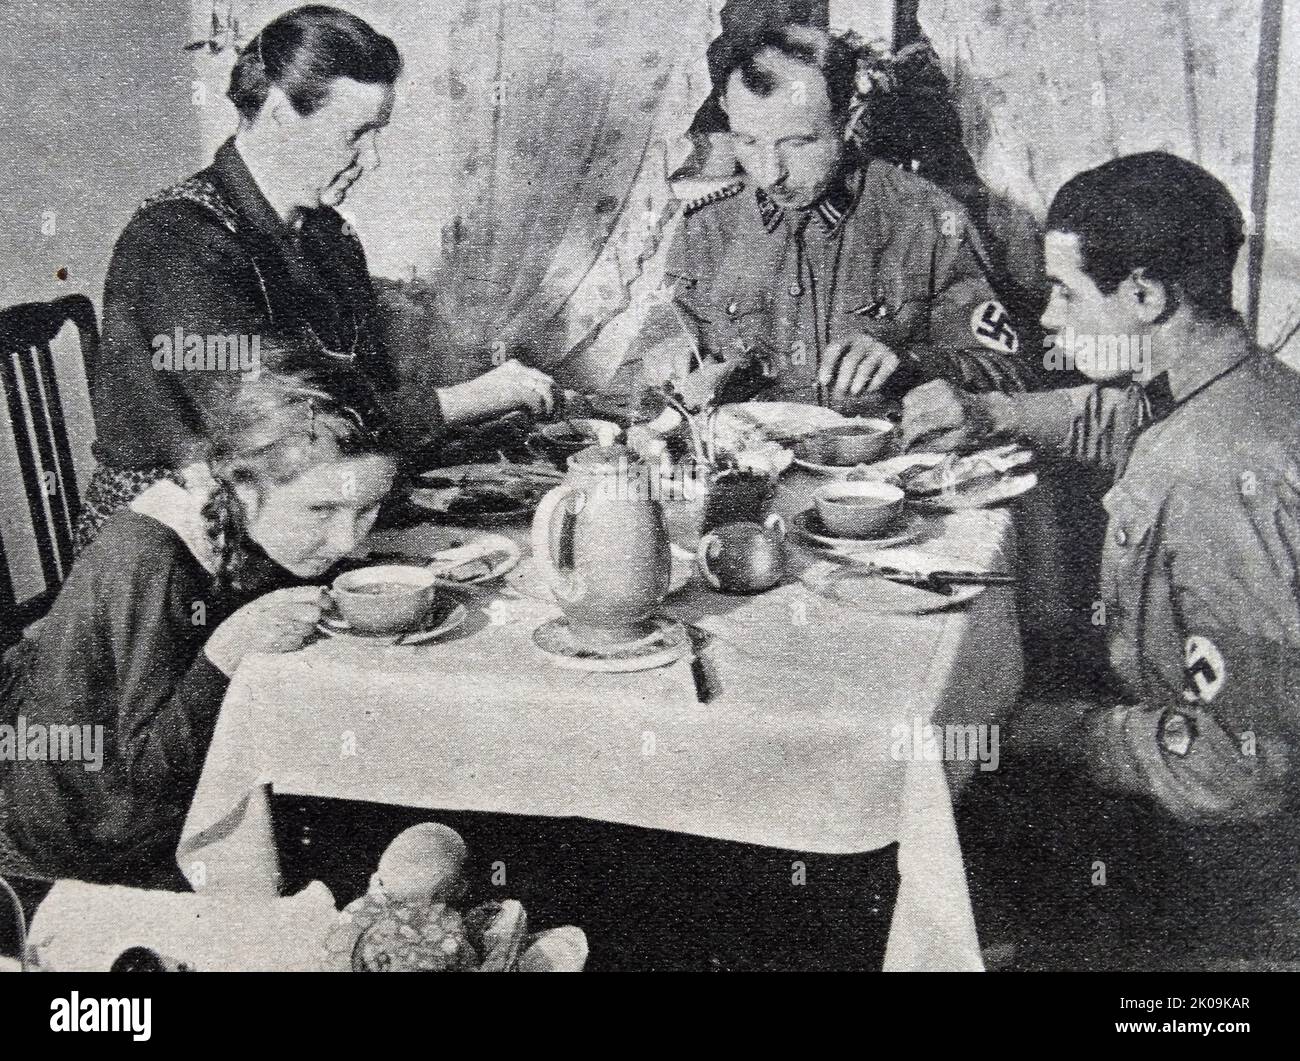 Nazi Storm Trooper Johann Laub eating at home with his family. The Sturmabteilung was the Nazi Party's original paramilitary wing. It played a significant role in Adolf Hitler's rise to power in the 1920s and 1930s. Stock Photo